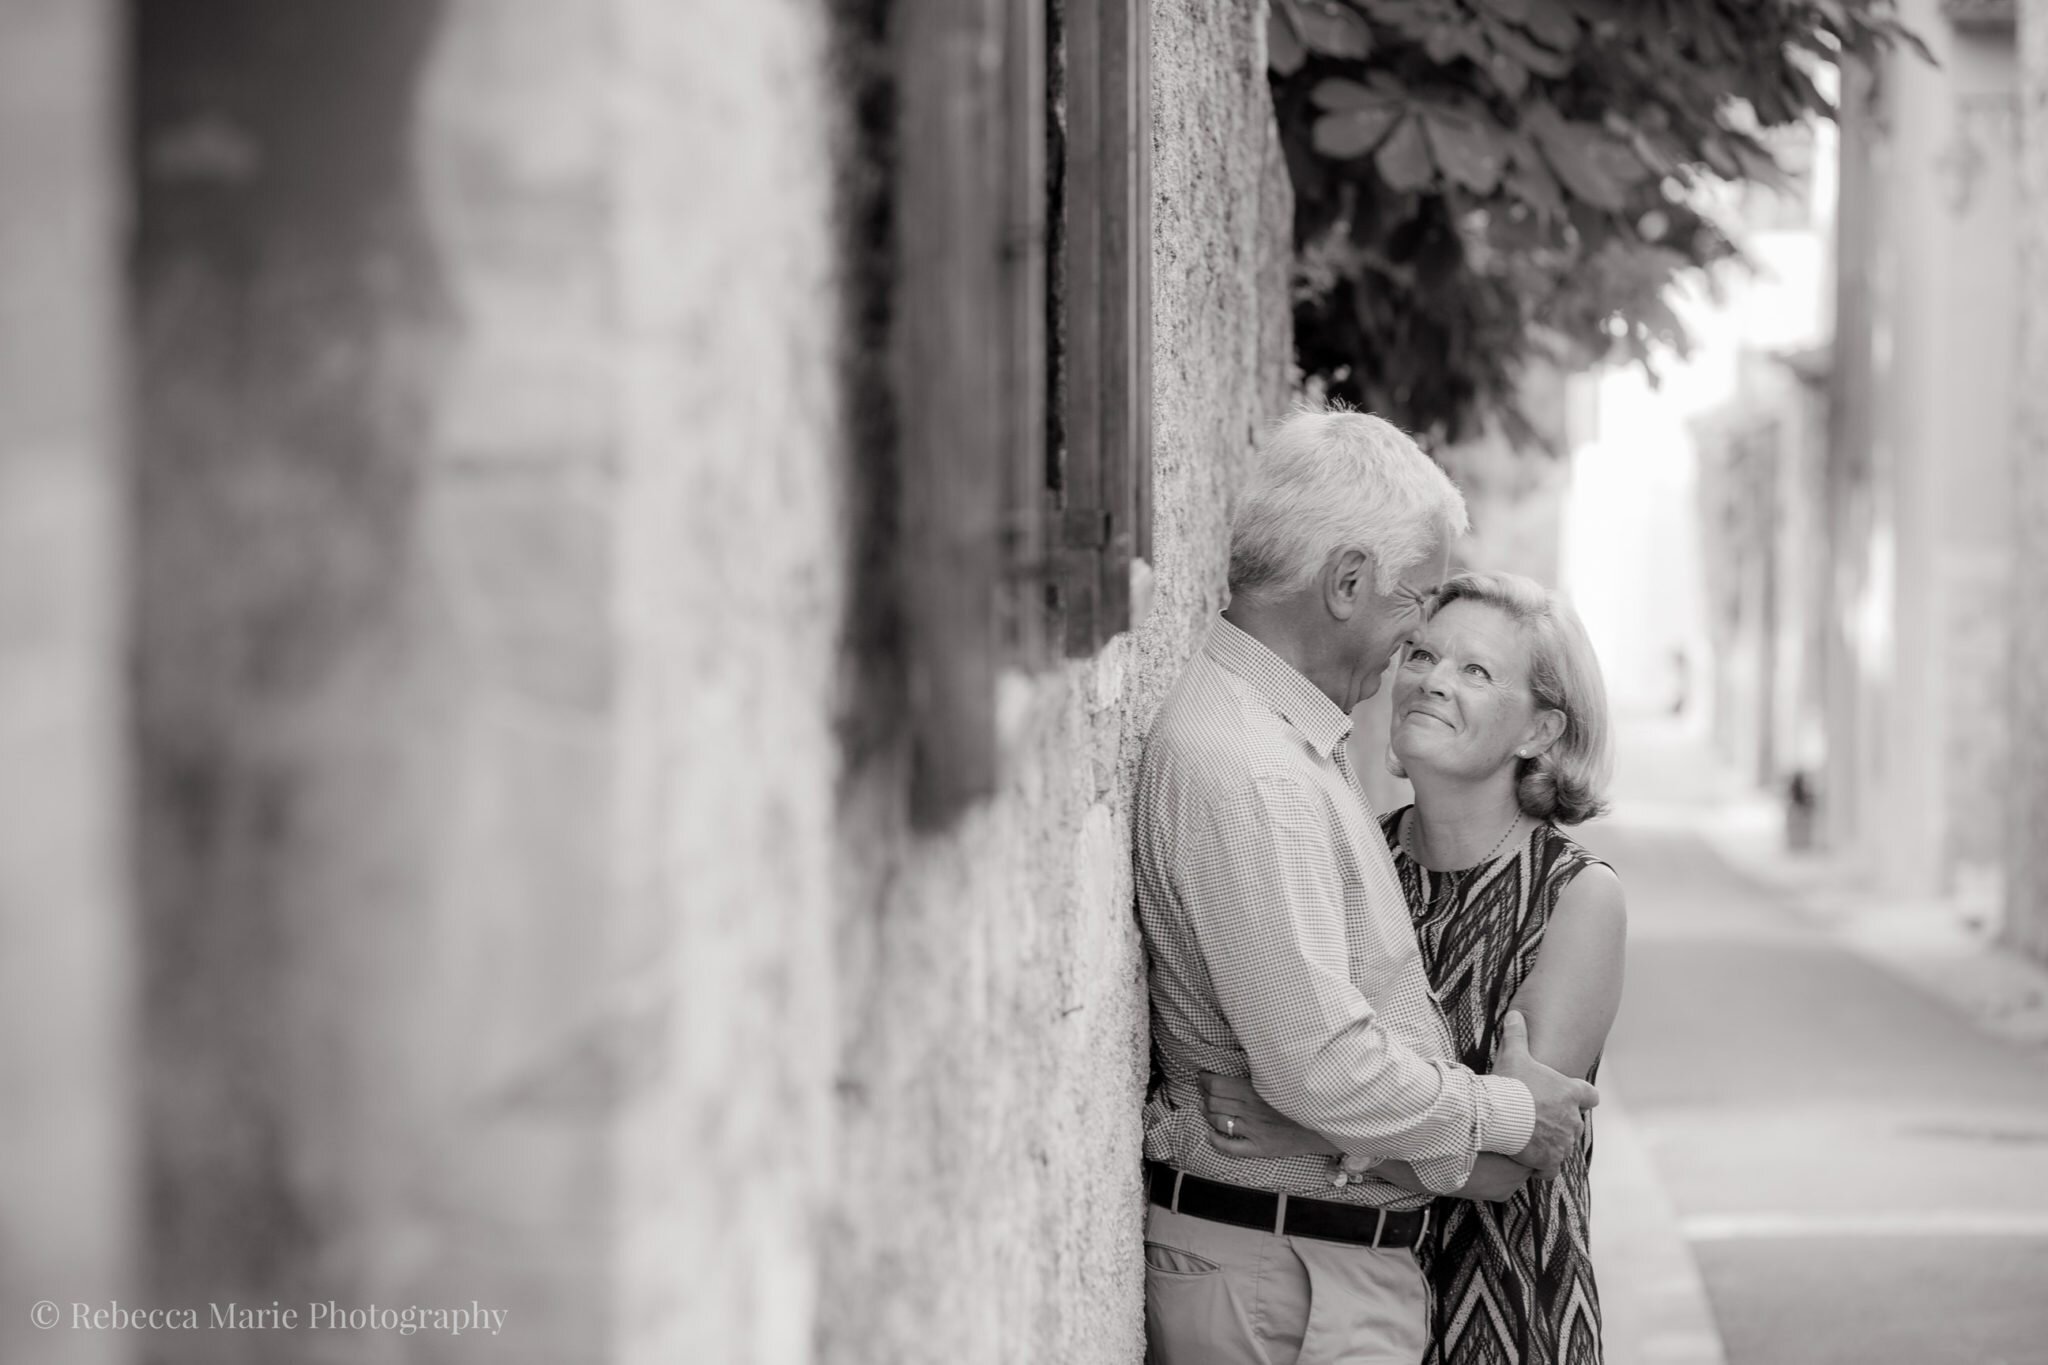 Portraits-in-France-Valbonne-Rebecca-Marie-Photography-11-1